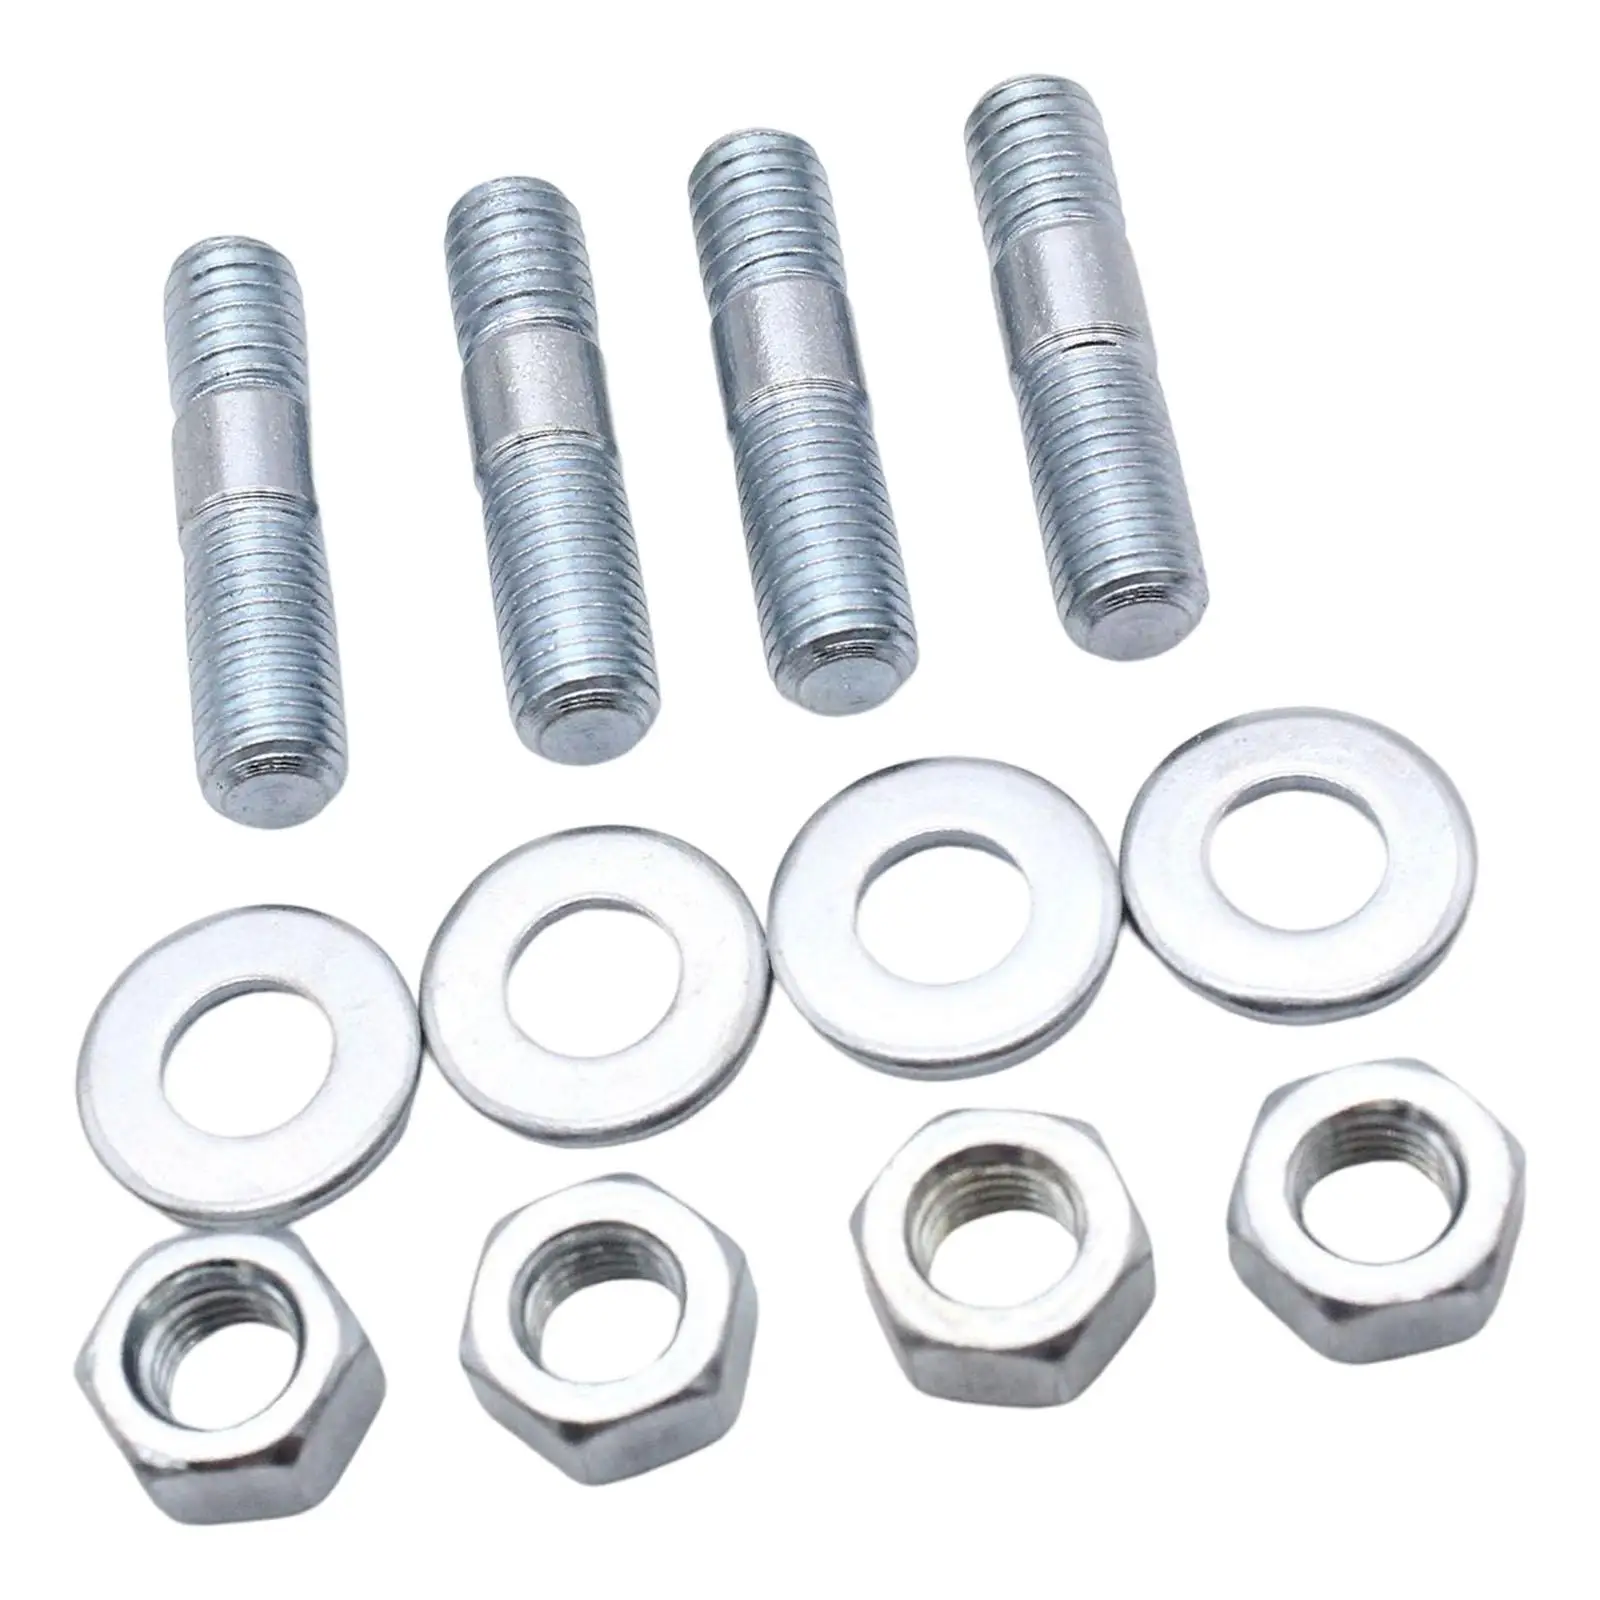 Carburetor Stud Kit Metal 1 3/8 inch Carb Studs Kit 5/16in Threads Carb Spacer Stud Kit Fit for Vehicle Parts Easy to Install